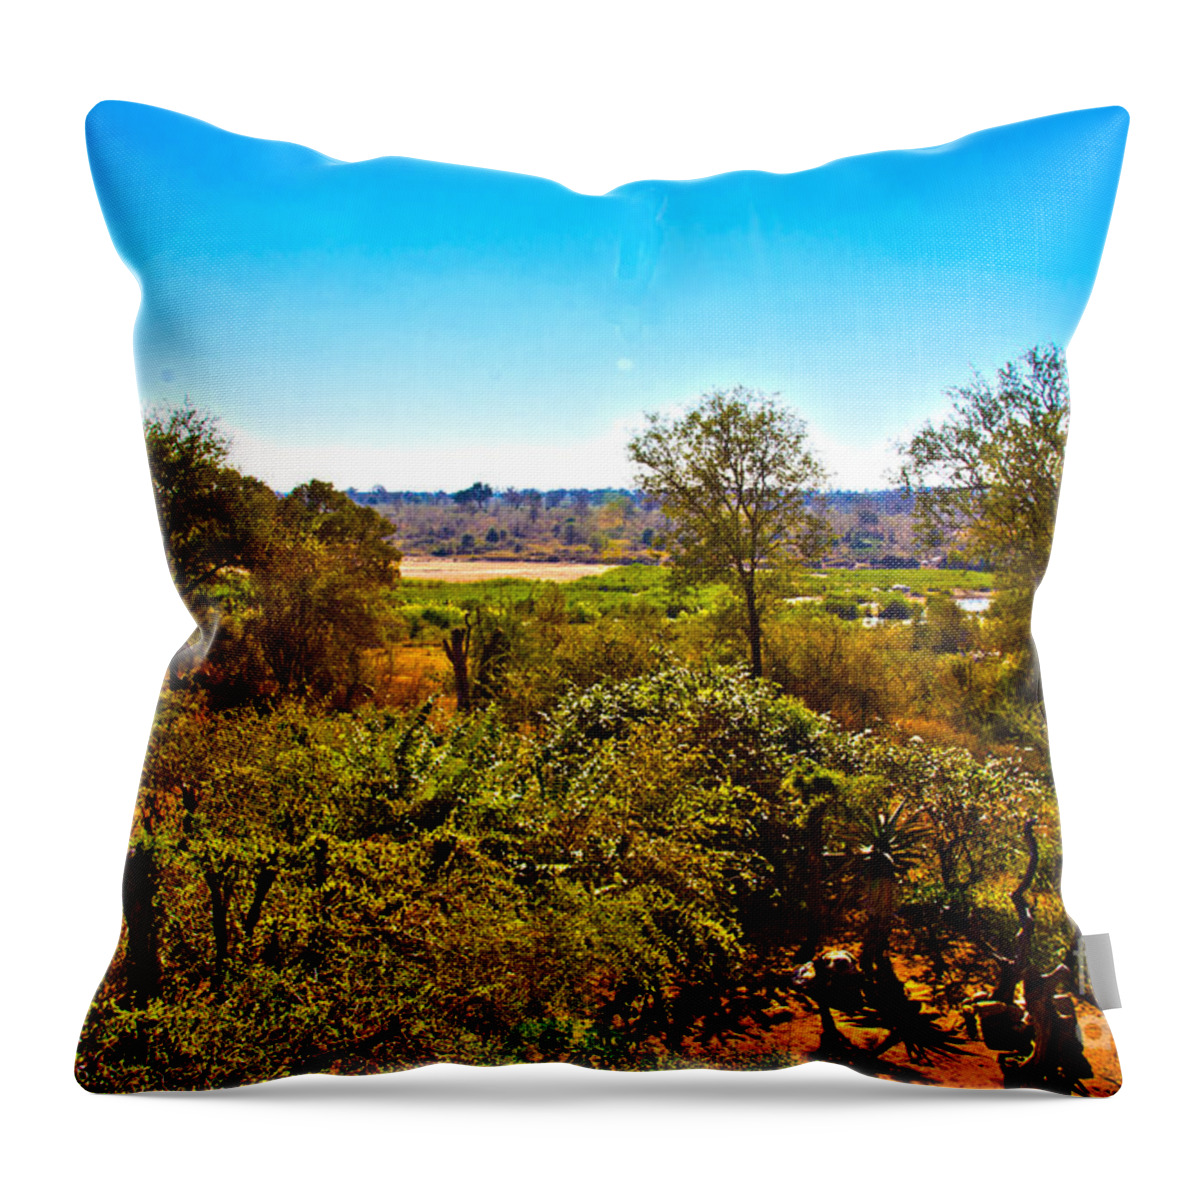 Landscape Throw Pillow featuring the digital art African Landscape #1 by Pravine Chester